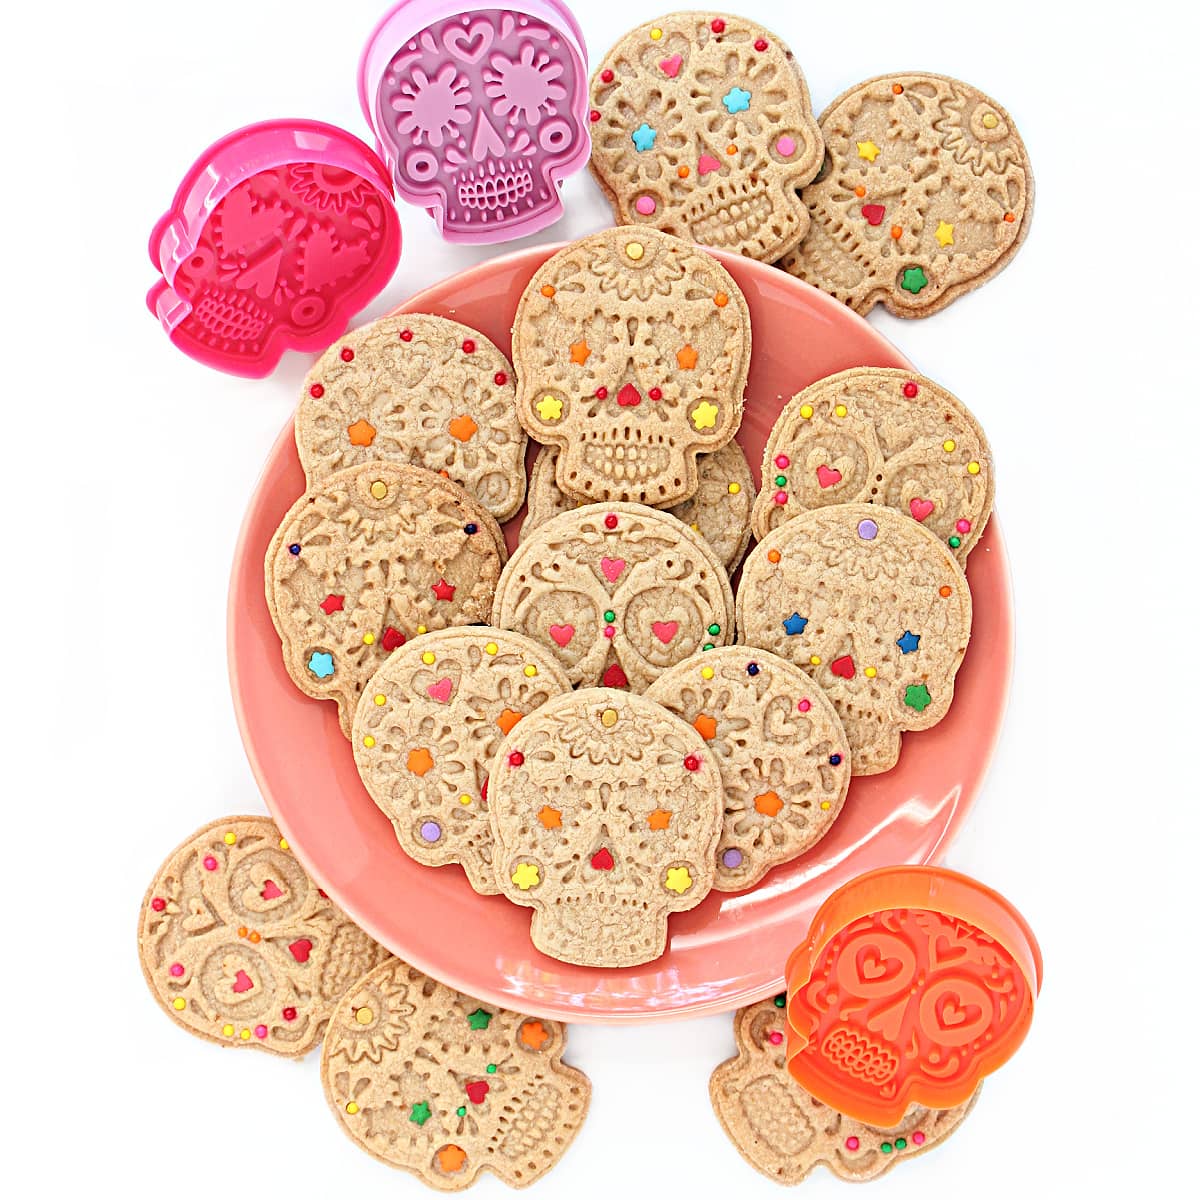 Apple Cider Stamped Cookies made with a calavera skull cookie stamp.